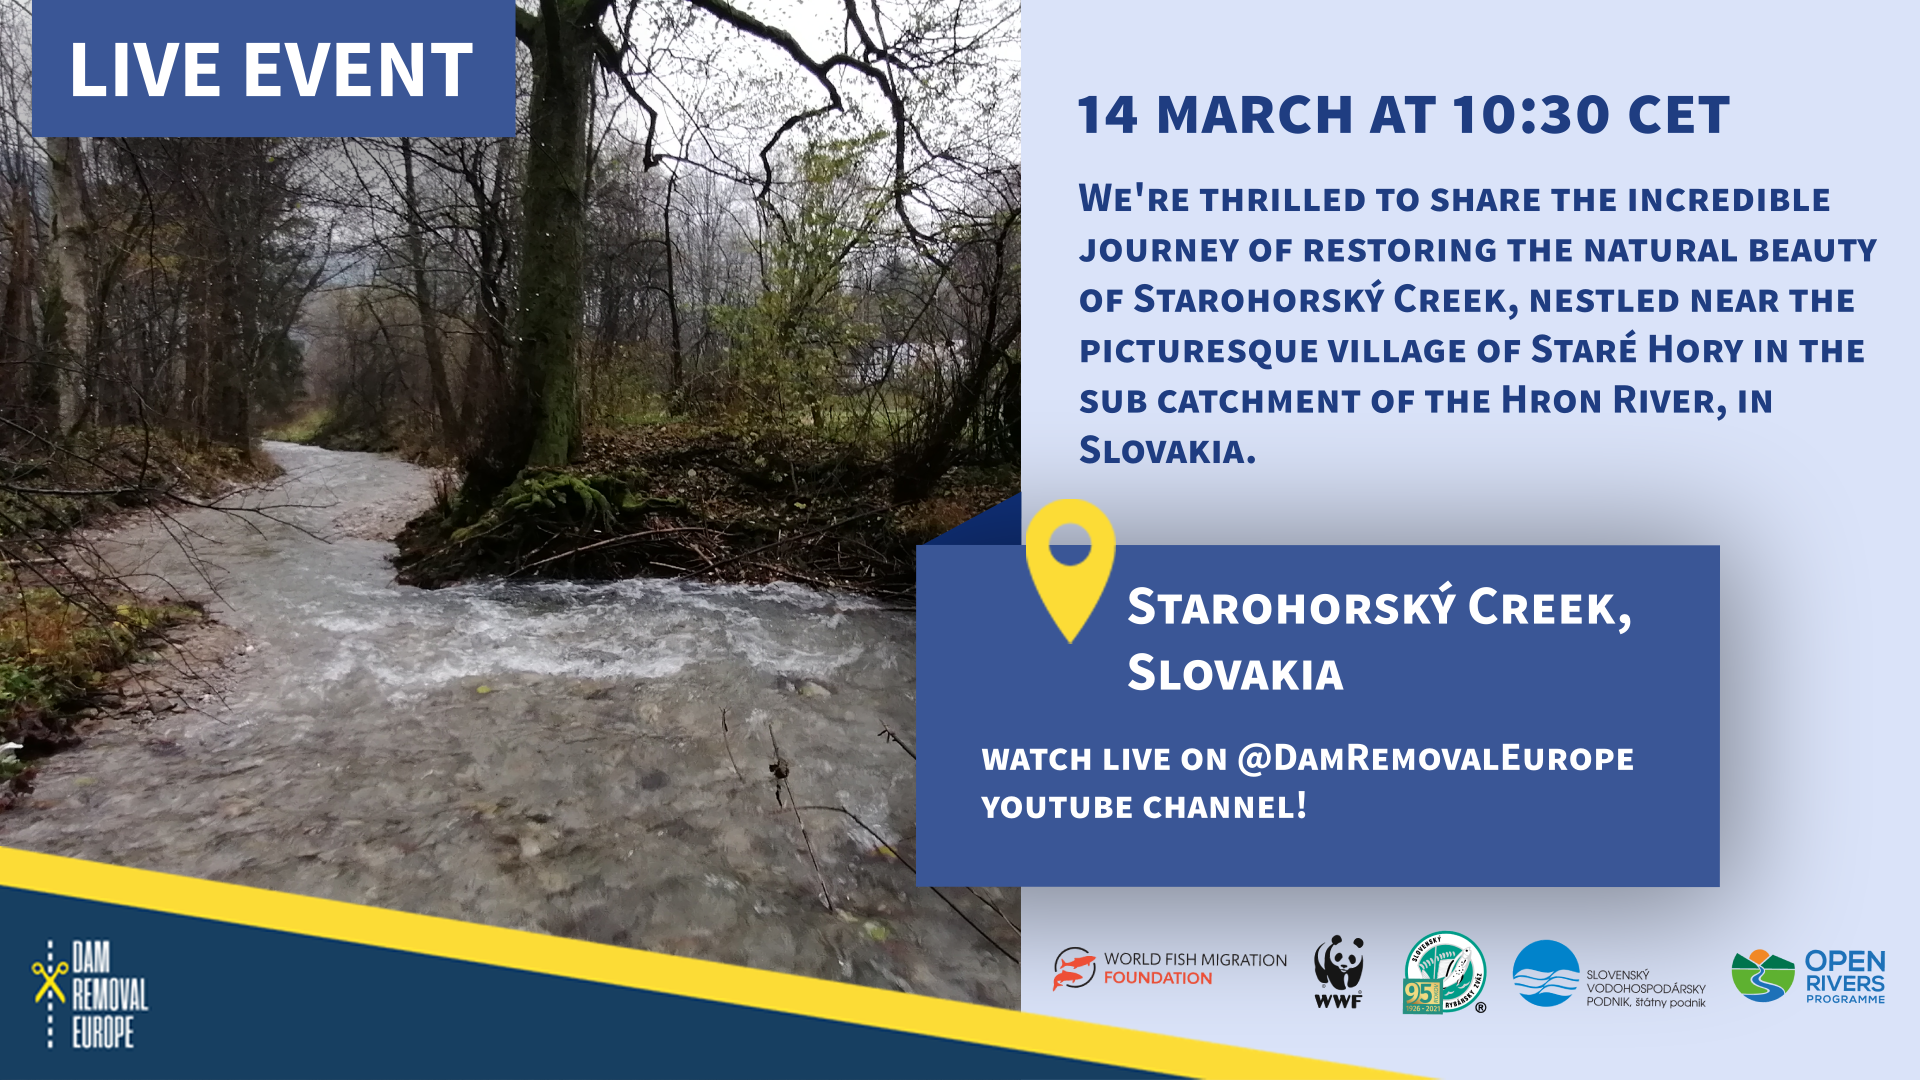 Live event in Slovakia broadcasted from DRE YouTube channel on March 14 at 10h30 CET.